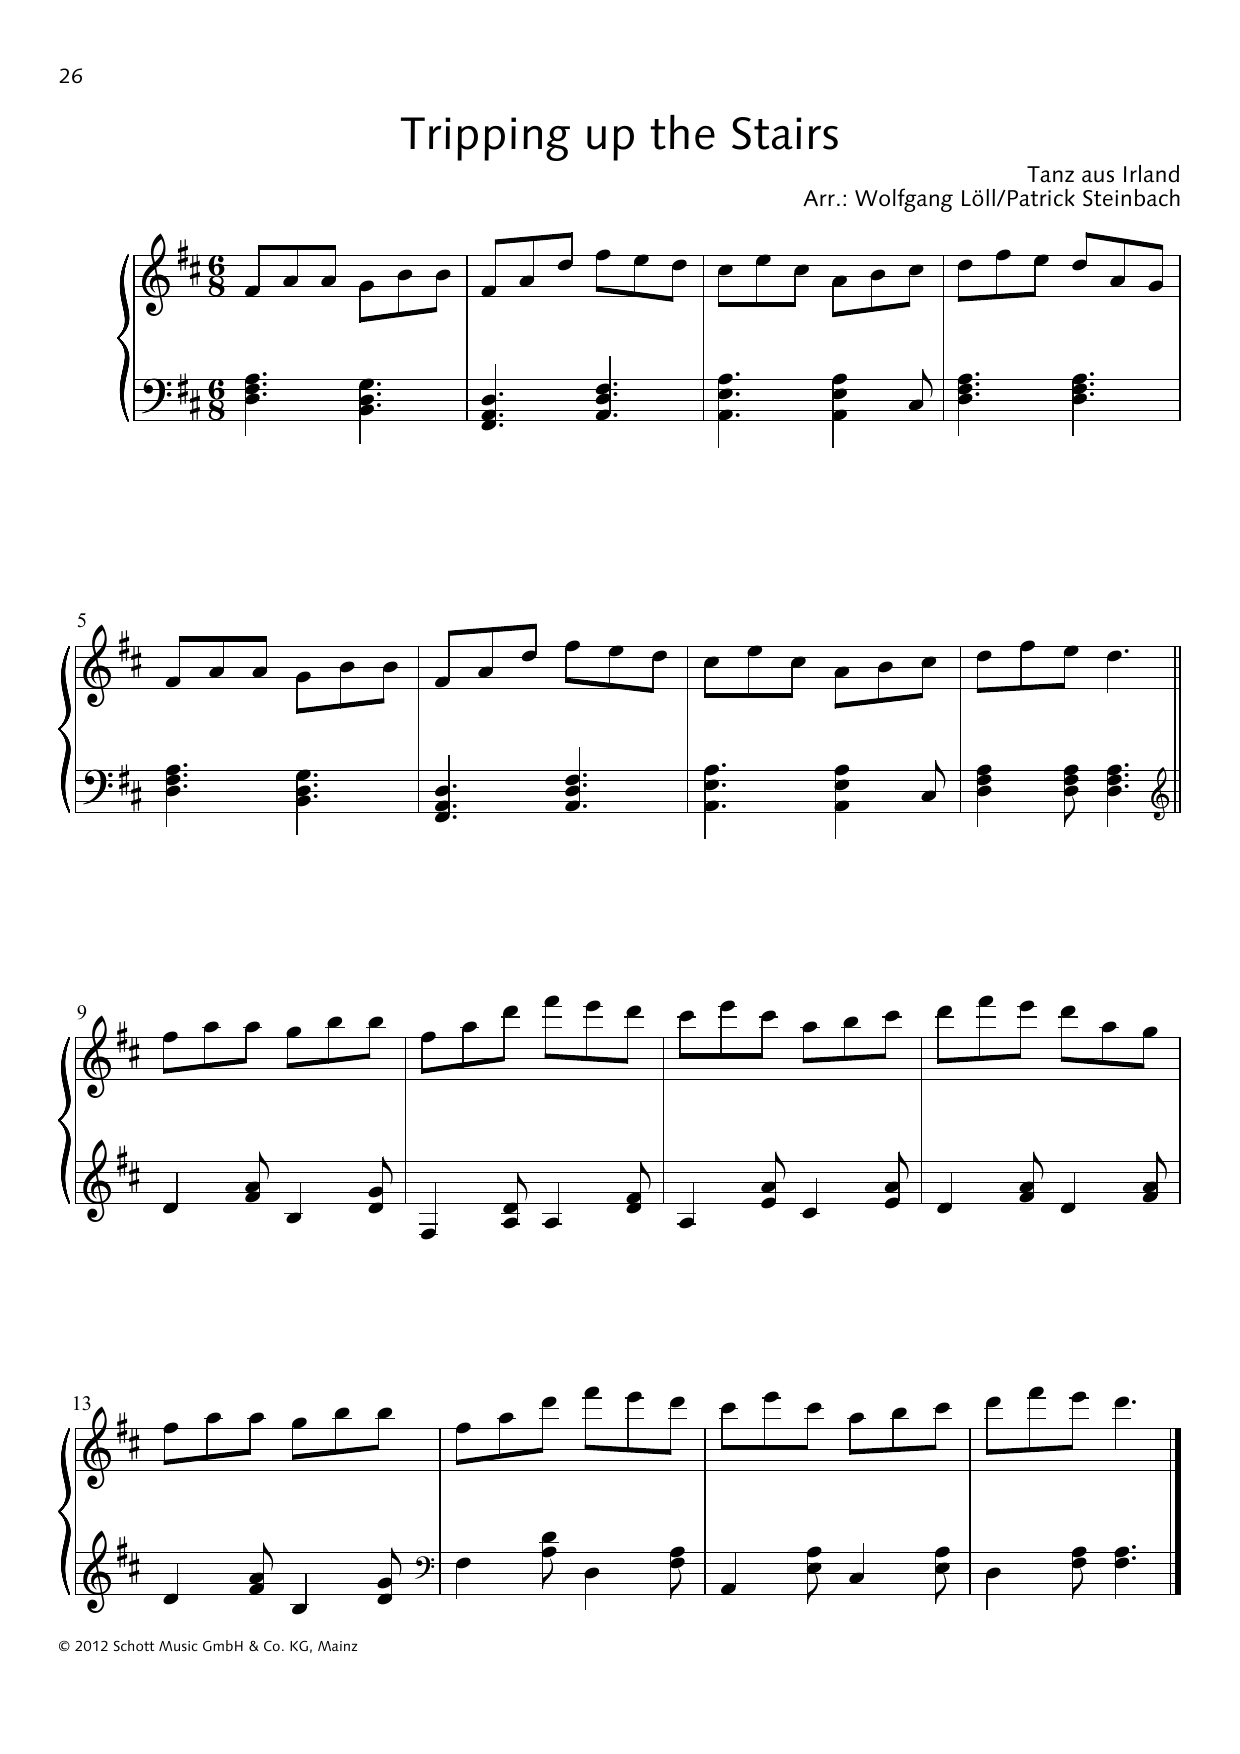 Download Wolfgang Löll Tripping up the Stairs Sheet Music